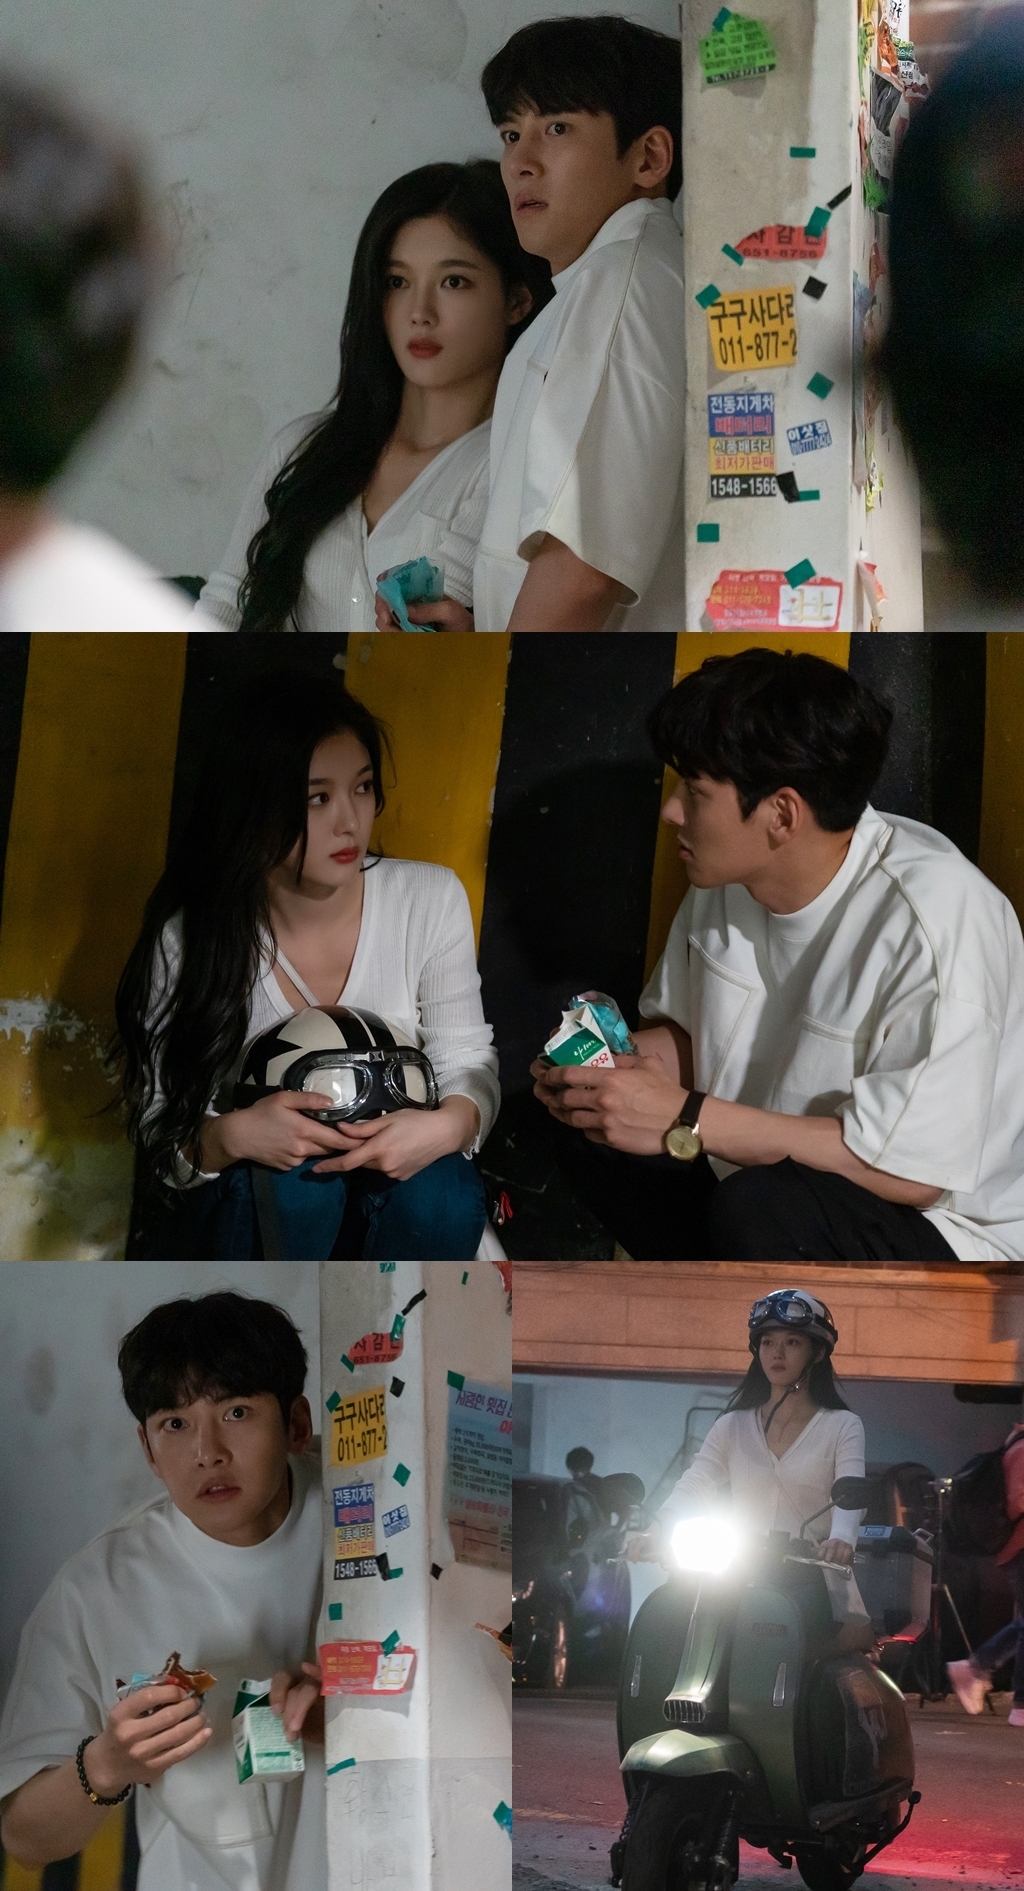 maekyung.com news teamThe close undercover scene of Ji Chang-wook and Kim Yoo-jung, the Convenience store morning star, was captured.In the 8th episode of SBSs Convenience Store Morning Star, which will be broadcast on the afternoon of the 11th, Jung Sae-byeol (Kim Yoo-jung), who came into Choi Dae-heons house, is foreseen and is making him expect an exciting development to unfold in the future.There is a reason why the star came into Choi Dae-heons house. The star came out of the house where the real estate fraud was used.Choi Dae-heon is scheduled to go out to catch a real estate owner who has been scammed by a star.In this regard, the production team of Convenience store Morning Star is raising questions by releasing the 8th scene where Choi Dae-heon and Jeong Sae-sung were lurking together.Choi Dae-heon and Jung-Sun star in the public photo are facing each other in the corner of the alley in the middle of the night.Choi Dae-heon, who is hiding behind the wall and urgently calling the star, is full of triviality, and the charm of the star that came on the bike is prepared and laughed.Above all, the two people are lurking together and lurking.Choi Dae-heon, a star star, squats down from peoples eyes and talks, and sticks to the wall of the building and looks somewhere.The appearance of those who seem surprised to see something makes them wonder what happened during the incubation.The production team said, Choi Dae-heon is grumbling about living with the star, but he leads and helps the stars work more than anyone else.We will see the two people getting a little closer to the chase after the real estate fraudster, and the strange atmosphere between the two people, he said, amplifying his curiosity for the 8th broadcast.What happened during the latent episode of Choi Dae-heon and Jeong Sae-sung can be seen in the 8th episode of SBSs Convenience Store Morning Star which airs at 10 p.m. on the 11th.